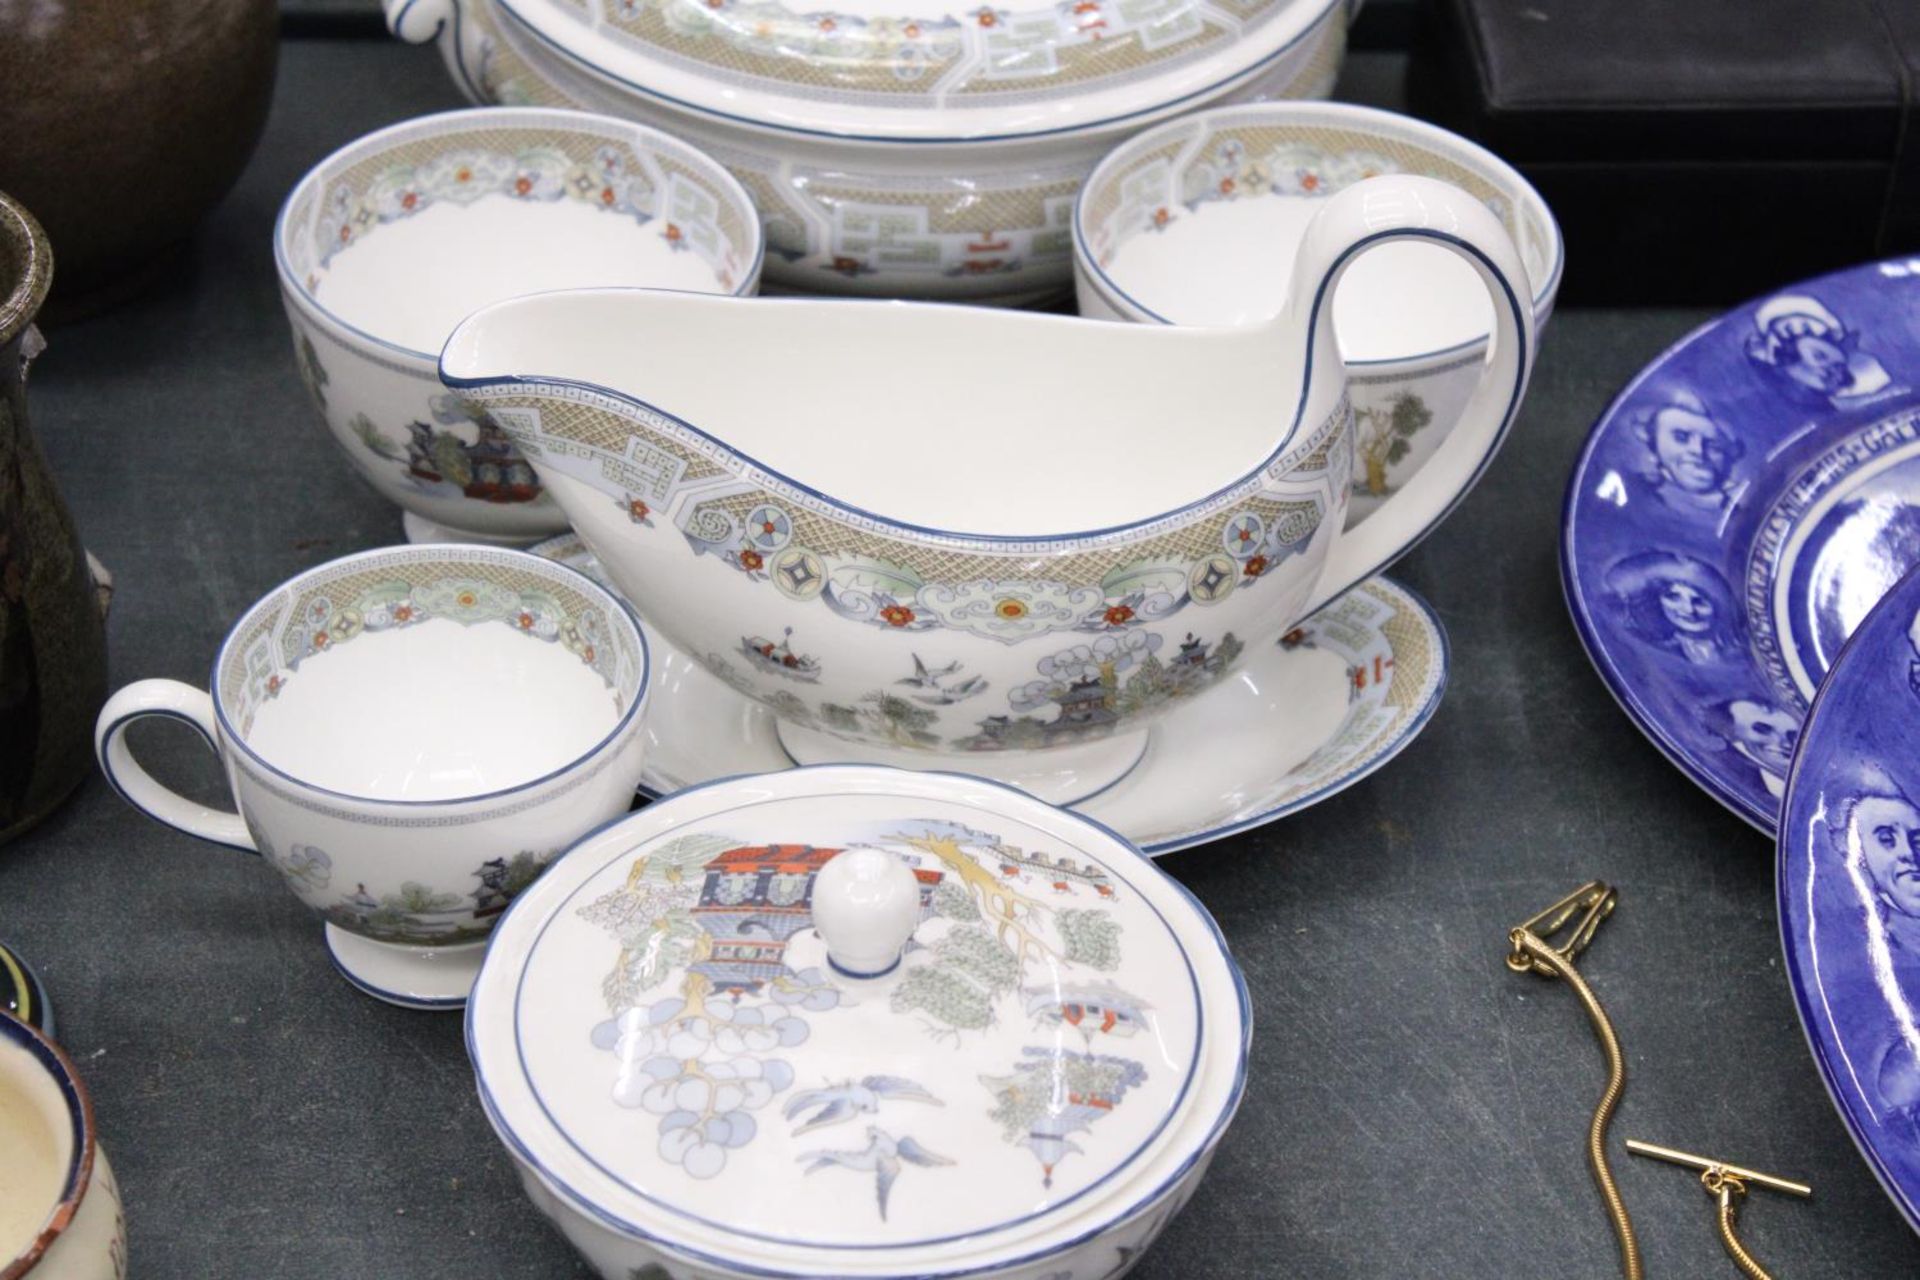 A PART ORIENTAL STYLE WEDGWOOD DINNER SERVICE TO INCLUDE A GRAVY JUG, CUP, PLATES ETC - Image 3 of 6